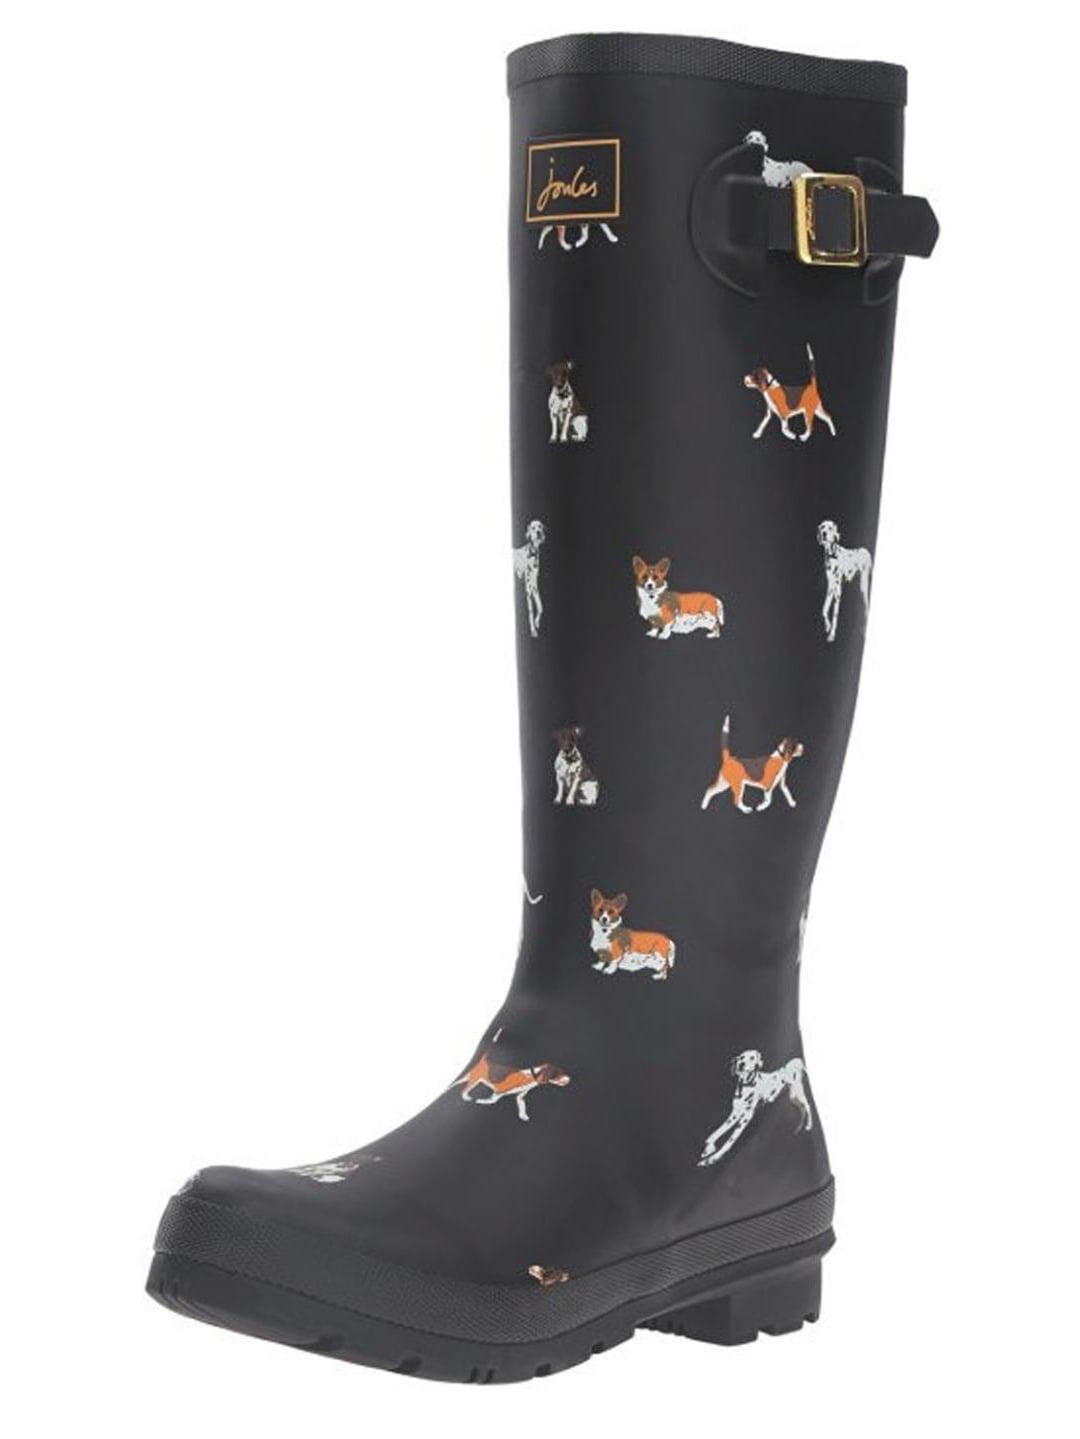 women's rain boots with dogs on them